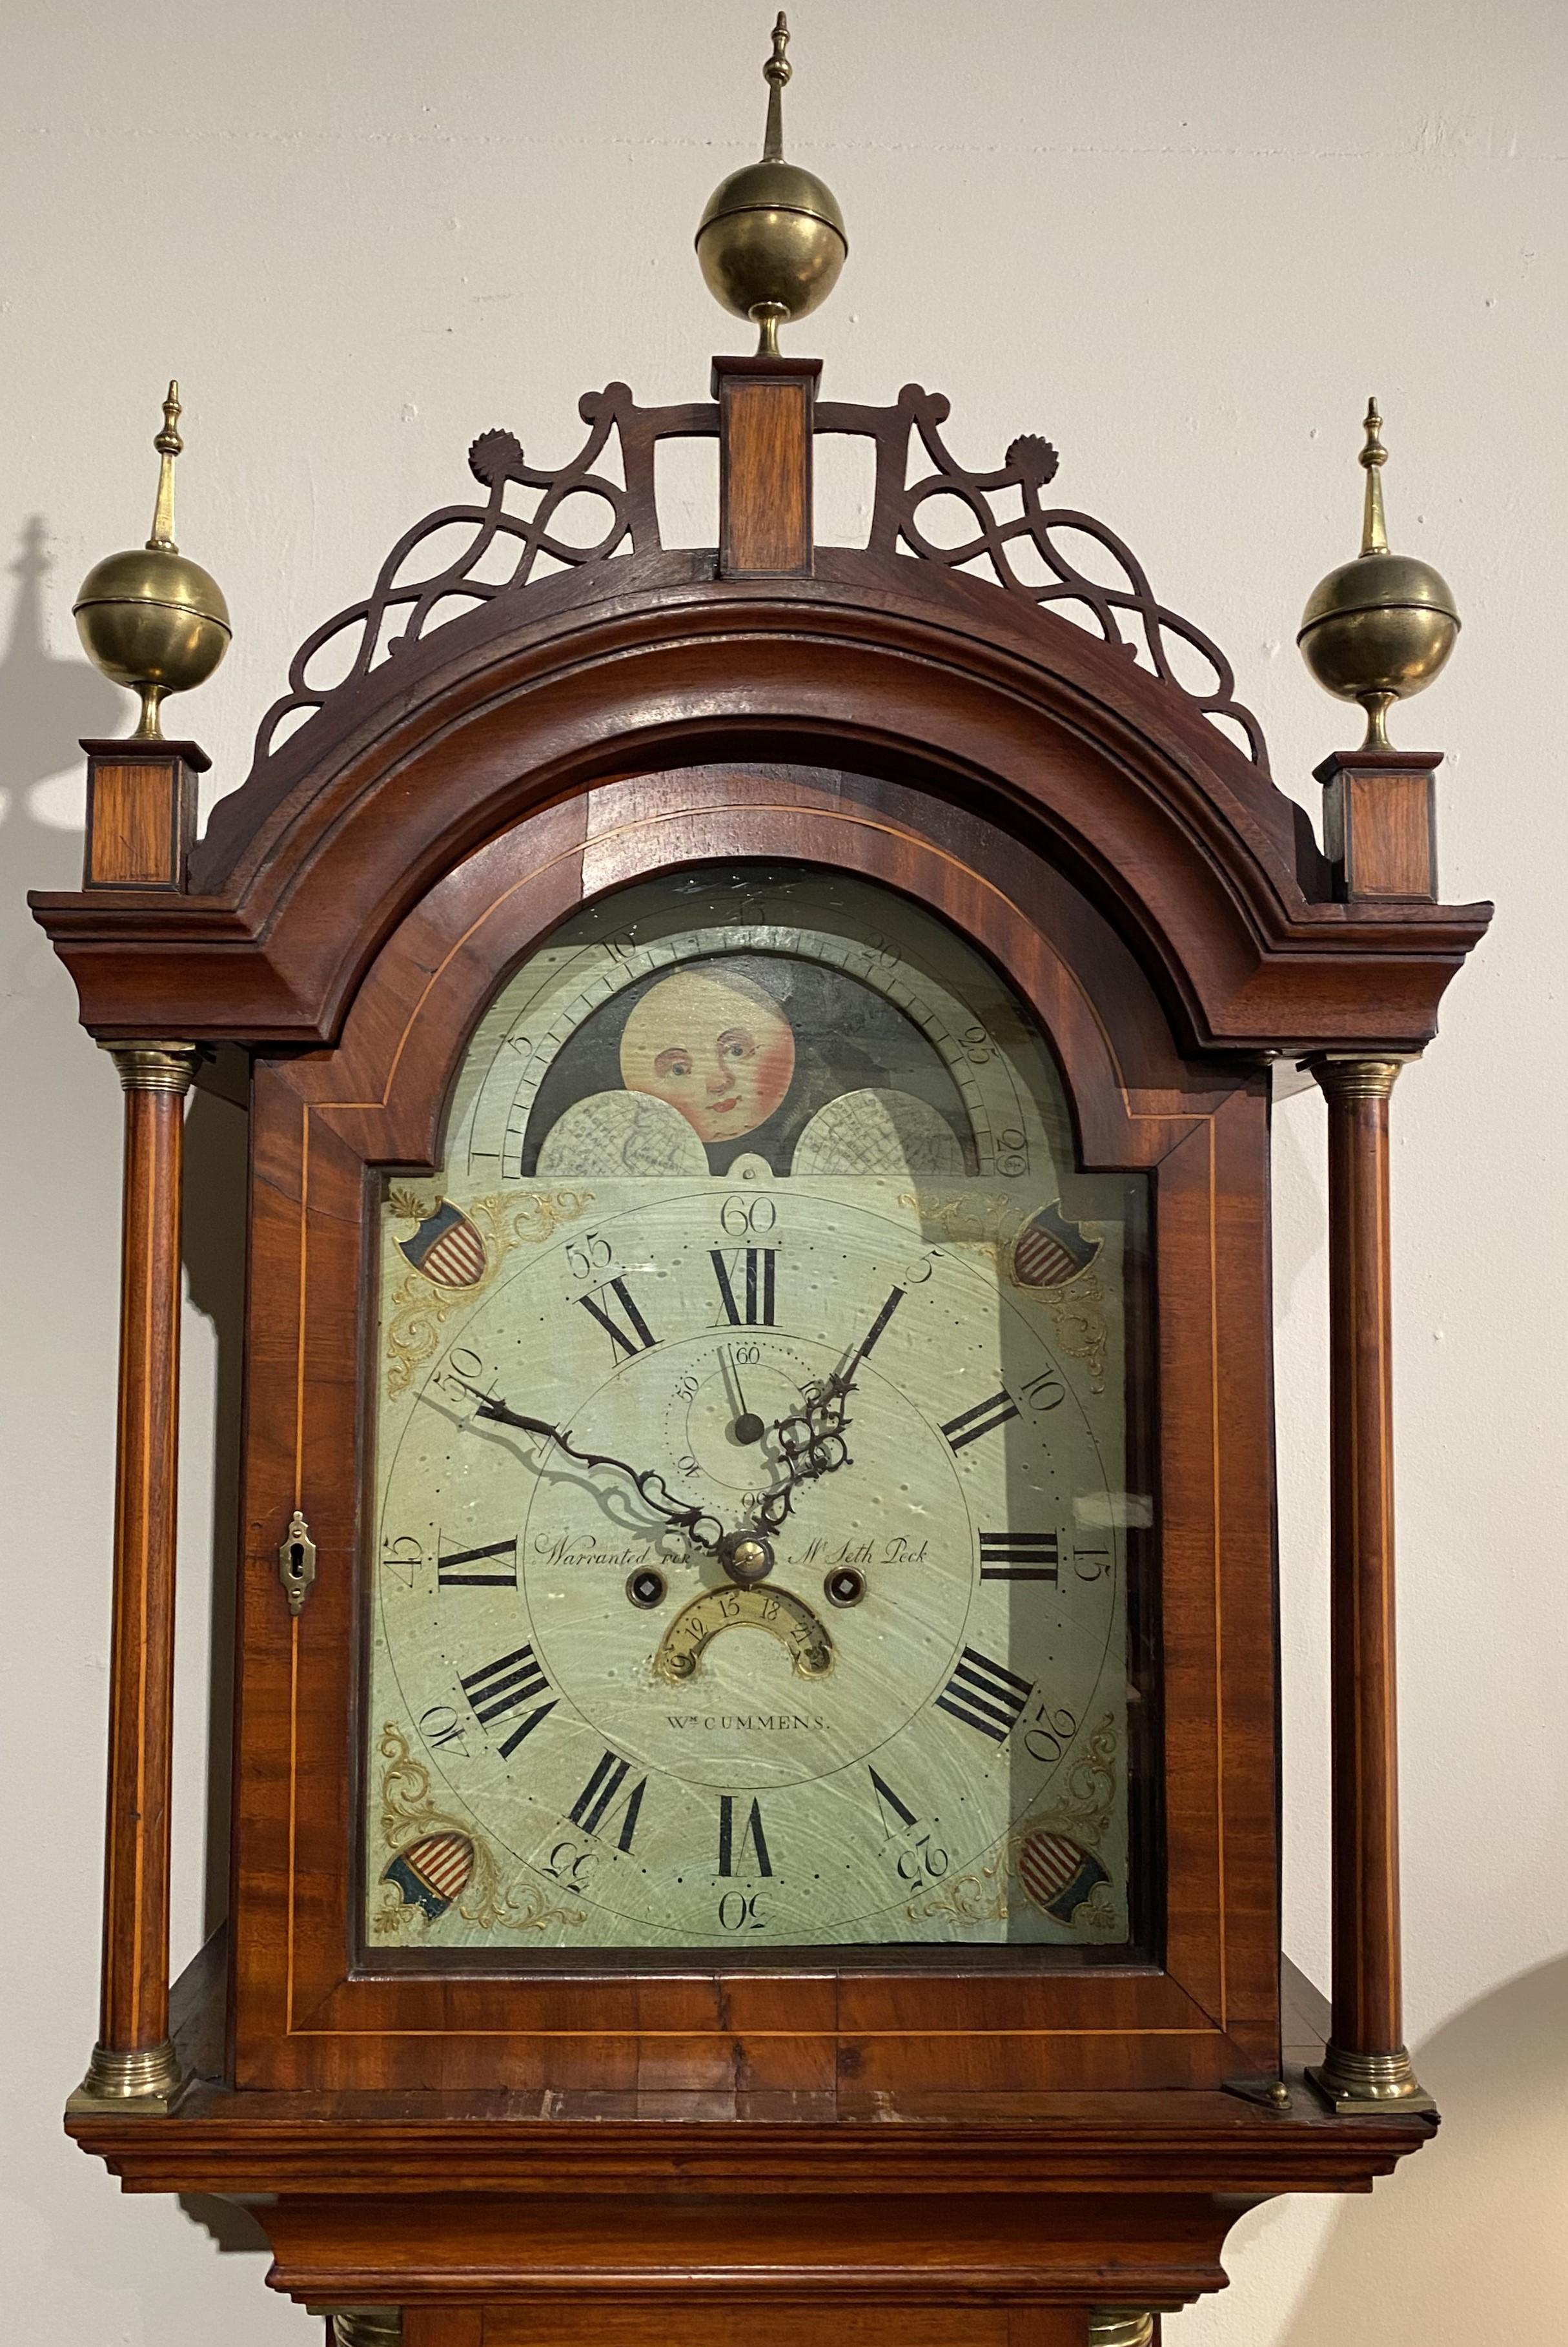 An exceptional Federal mahogany tall case clock with a delicate fretwork crest, adorned with three ball and spire brass finials, surmounting an arched form glass door, opening to a hand painted Roman numeral metal clock face with moon phase,